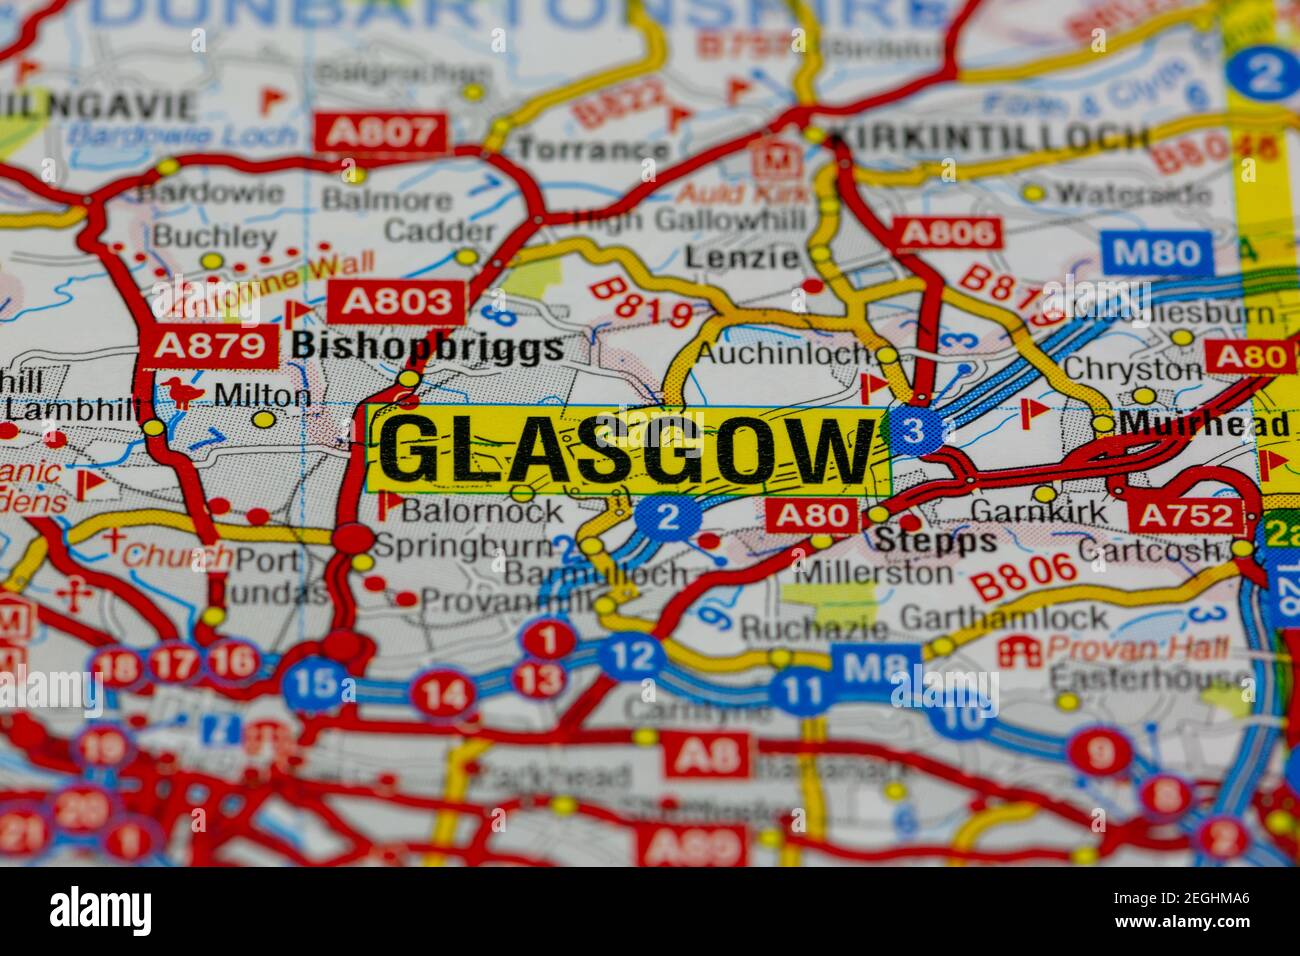 Glasgow, Scotland and surrounding areas shown on a road map or geography map Stock Photo